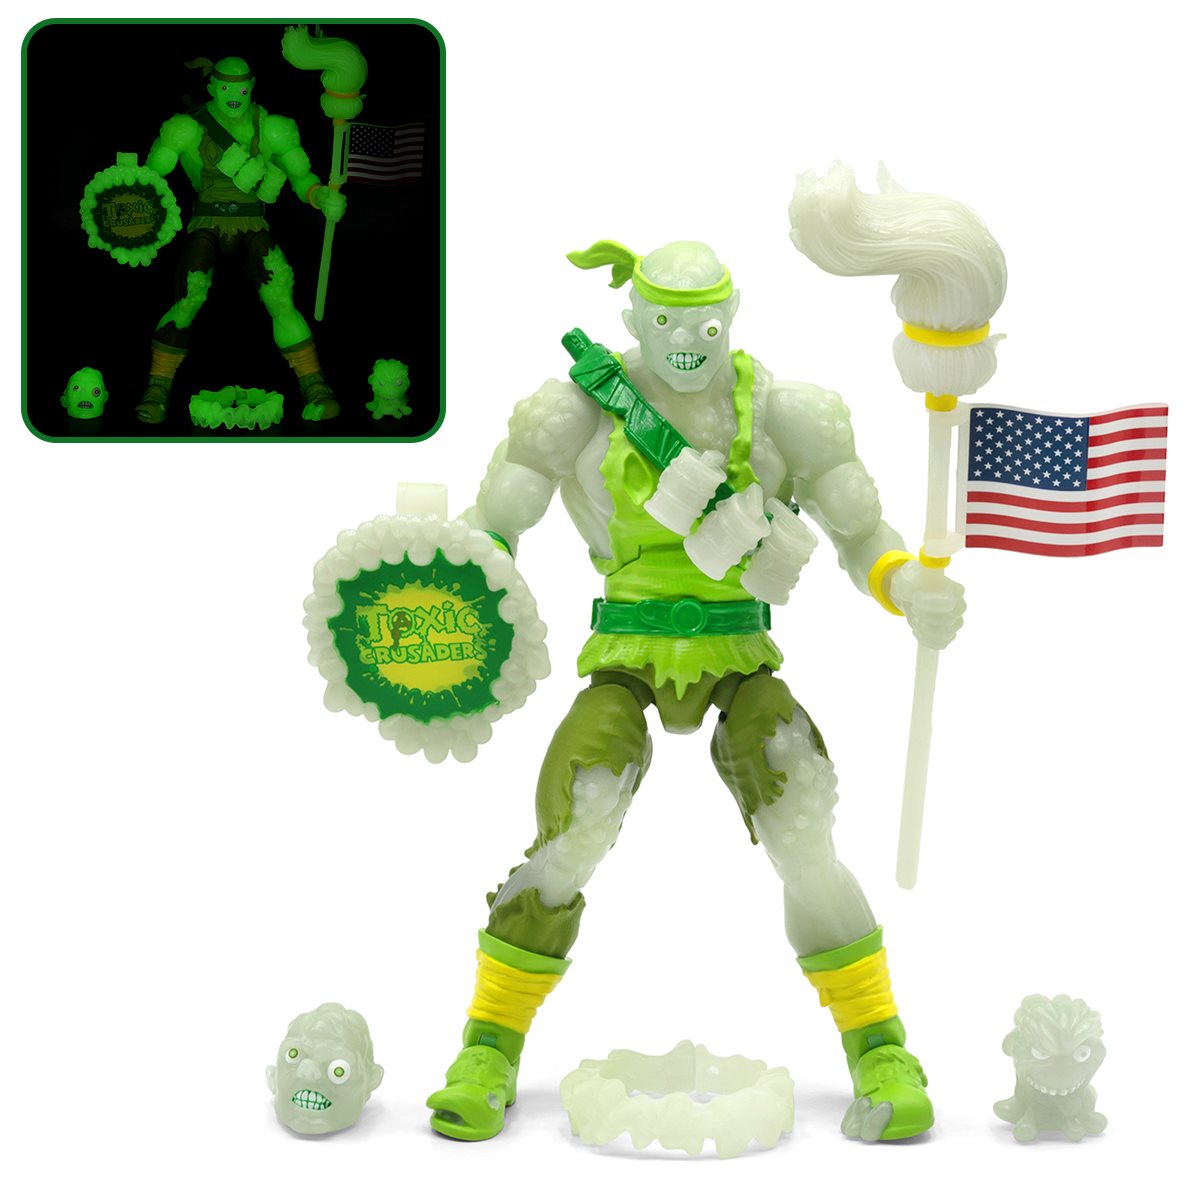 Toxic Crusaders glow in the dark action figure available for pre-order